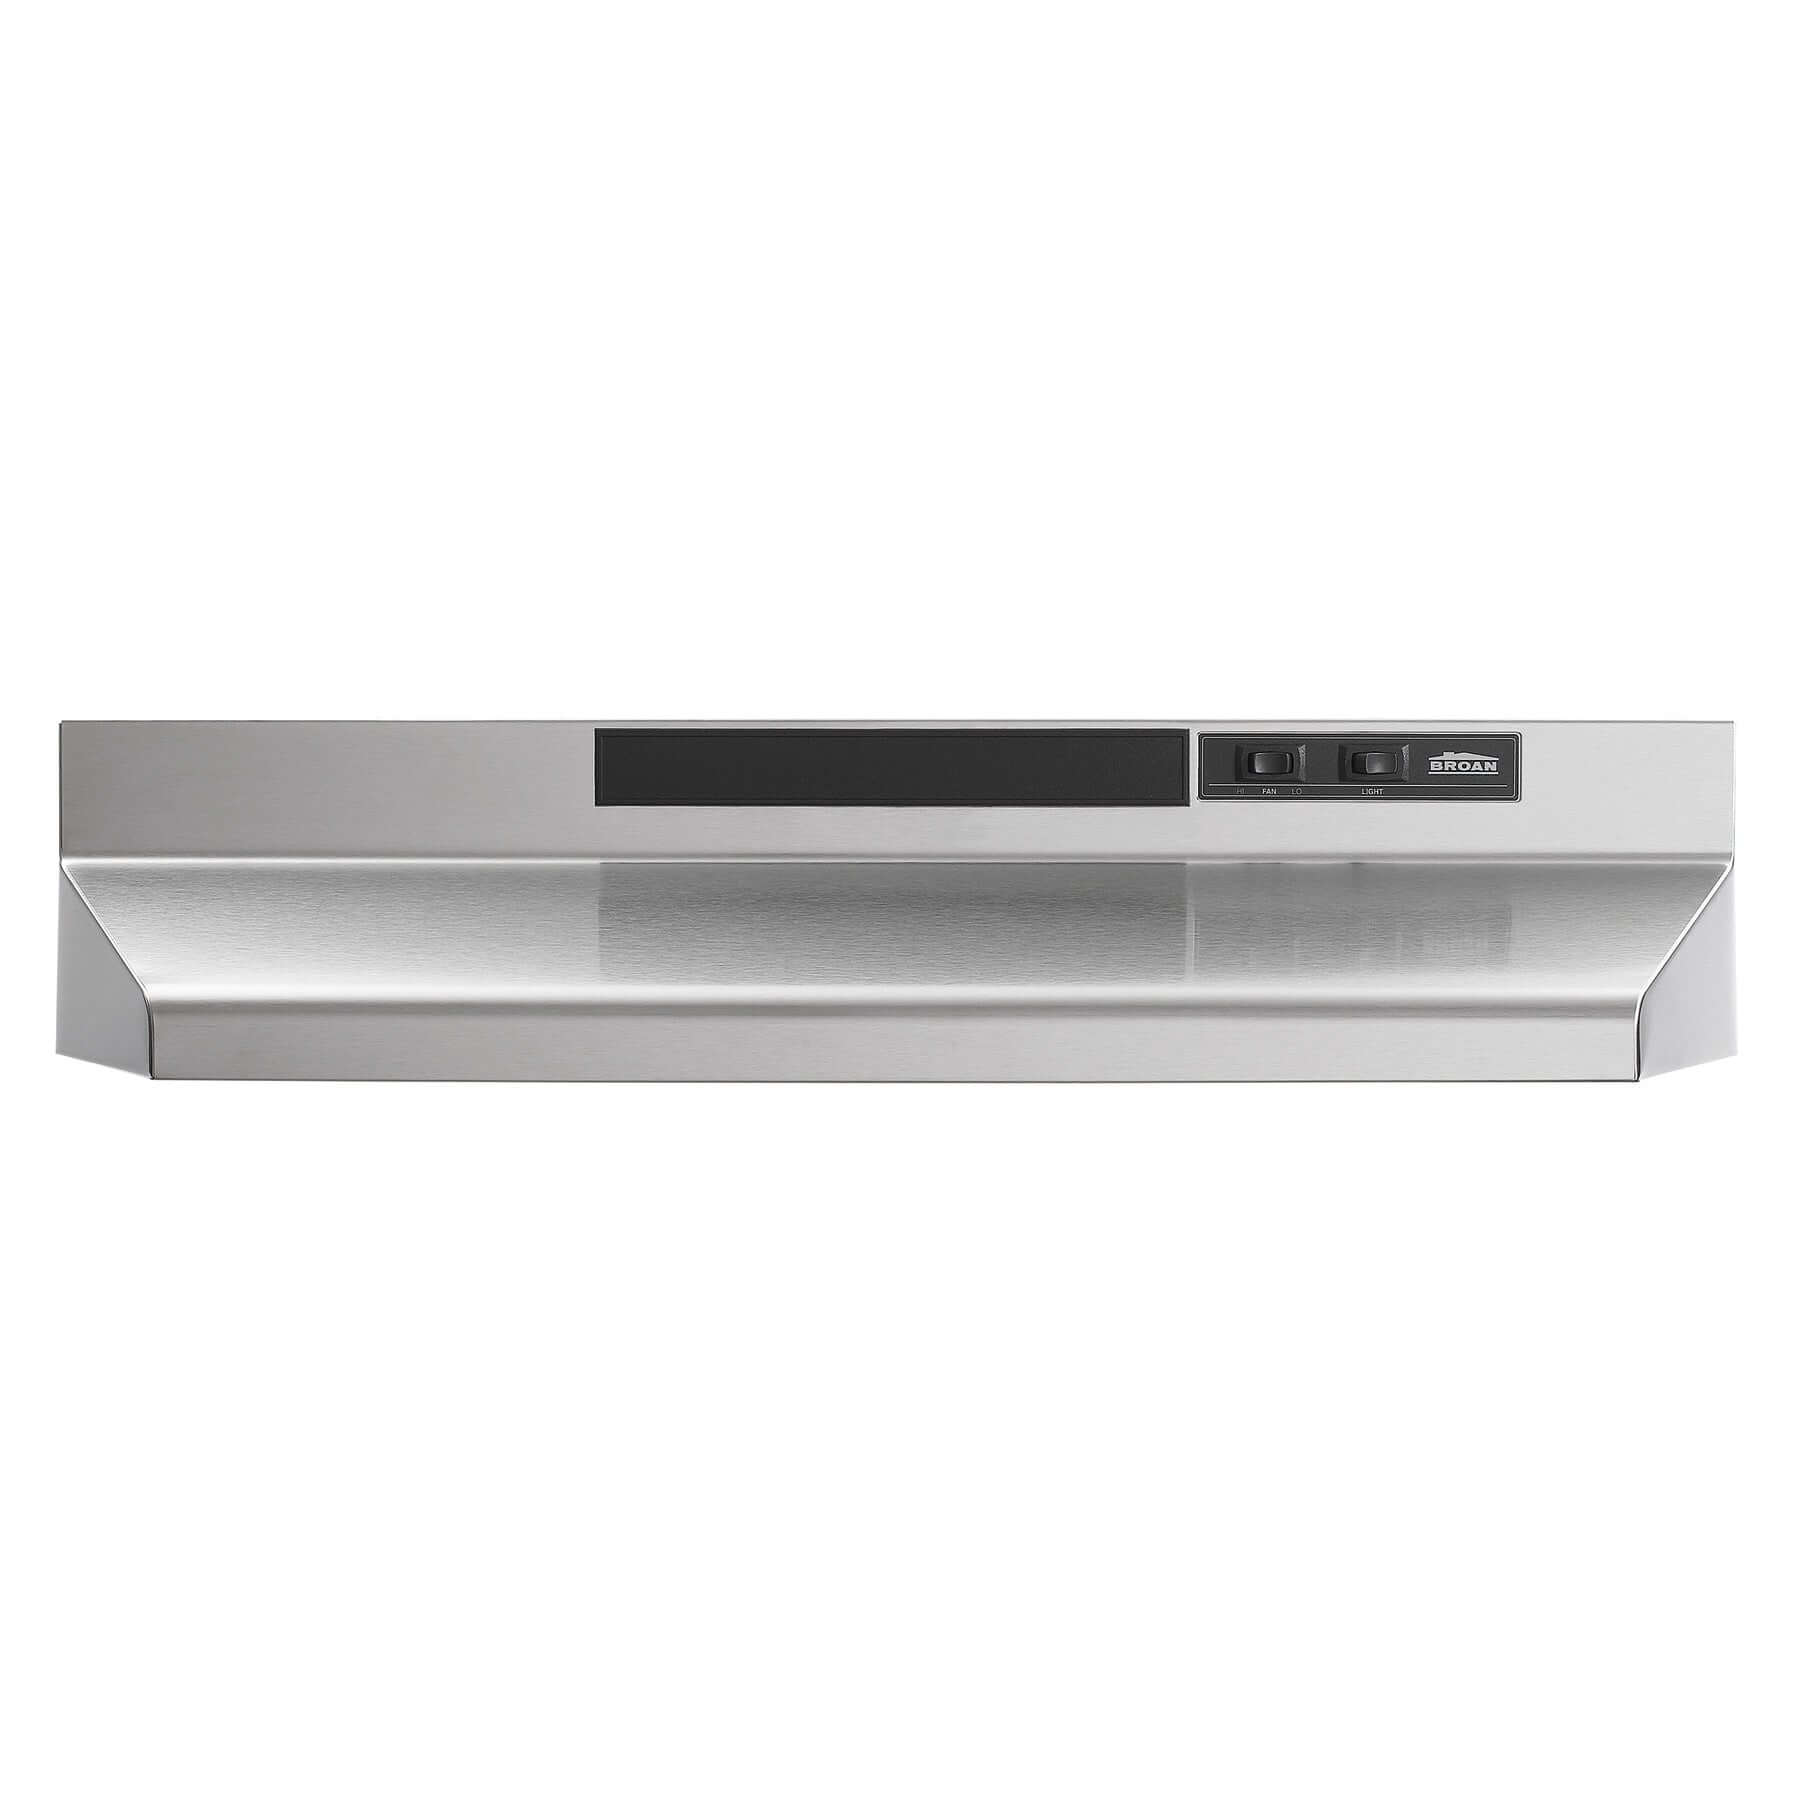 Broan F40000 Series 36 In. Two-Speed 4-Way Convertible Under Cabinet Range Hood In Stainless Steel (F403604)